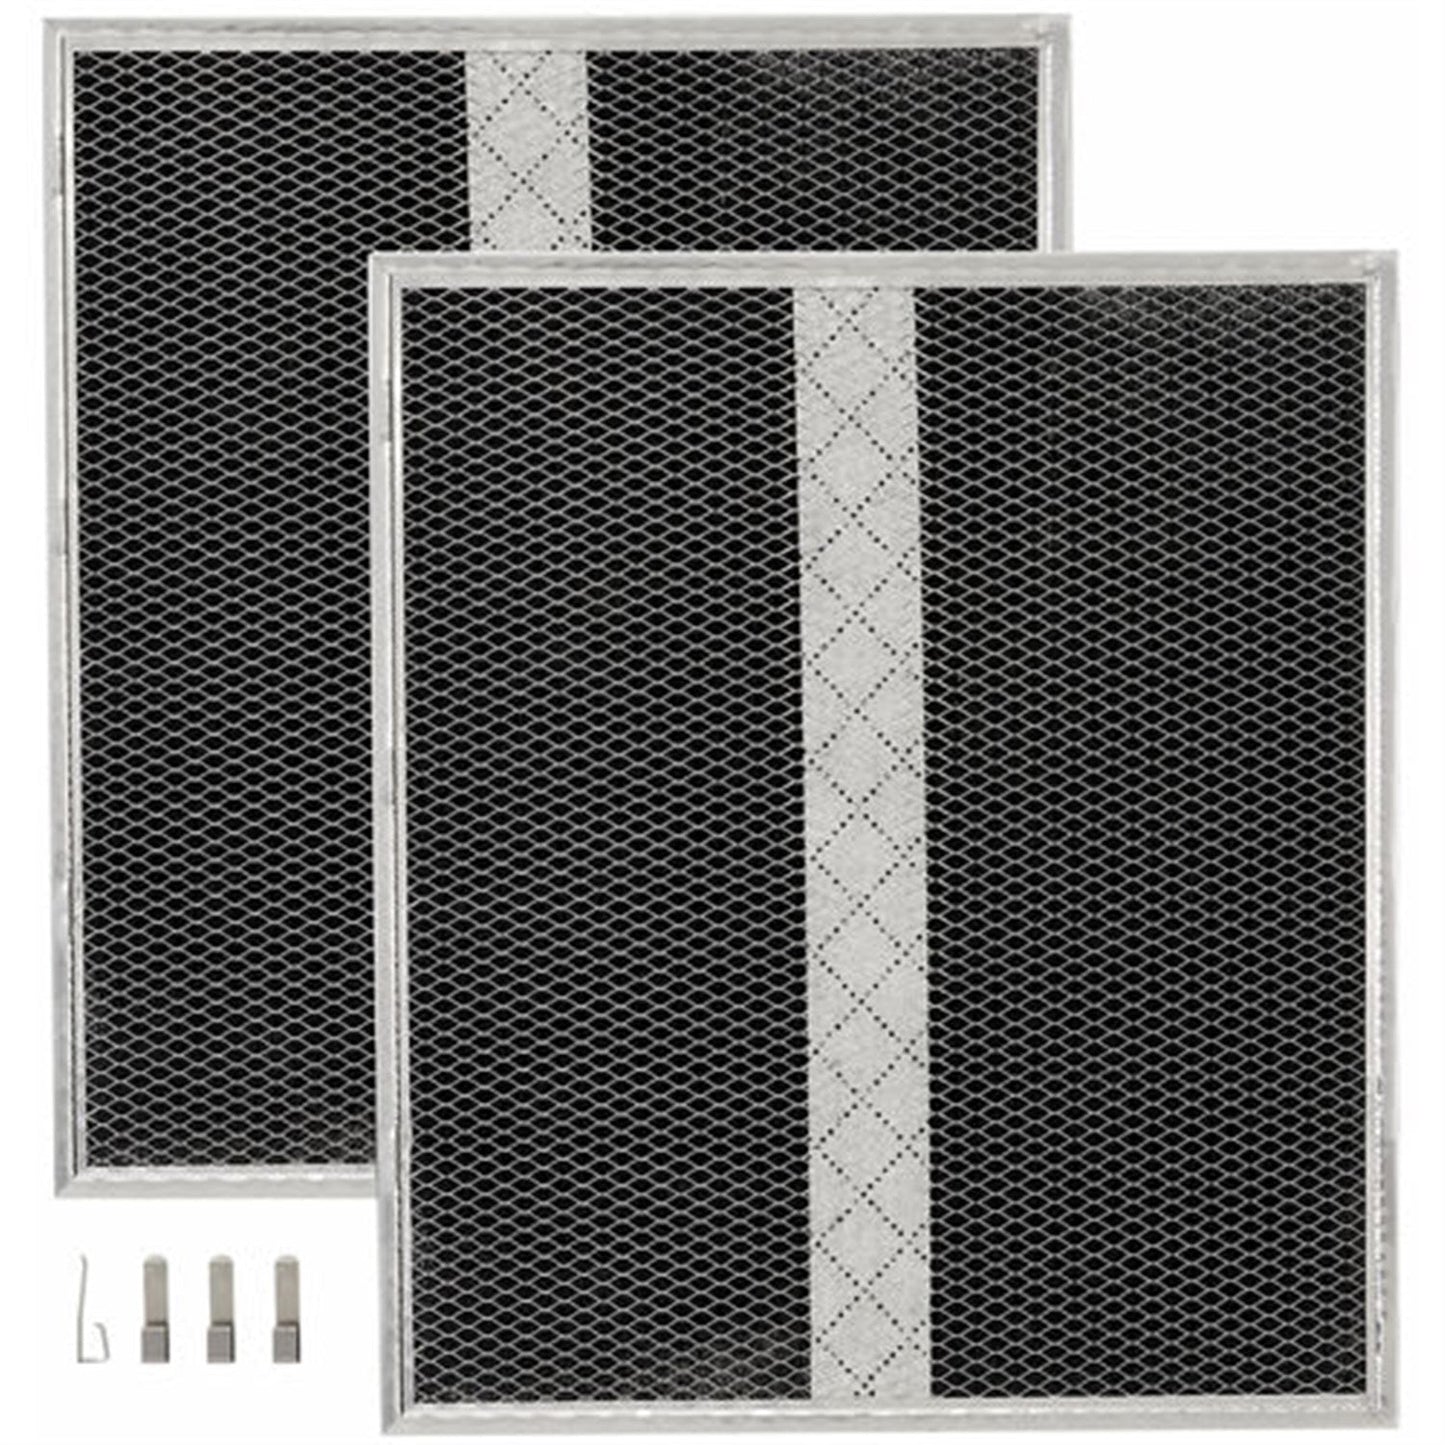 Broan HPF24 Charcoal Filter Kit (2-pack) for Filter Type Xb